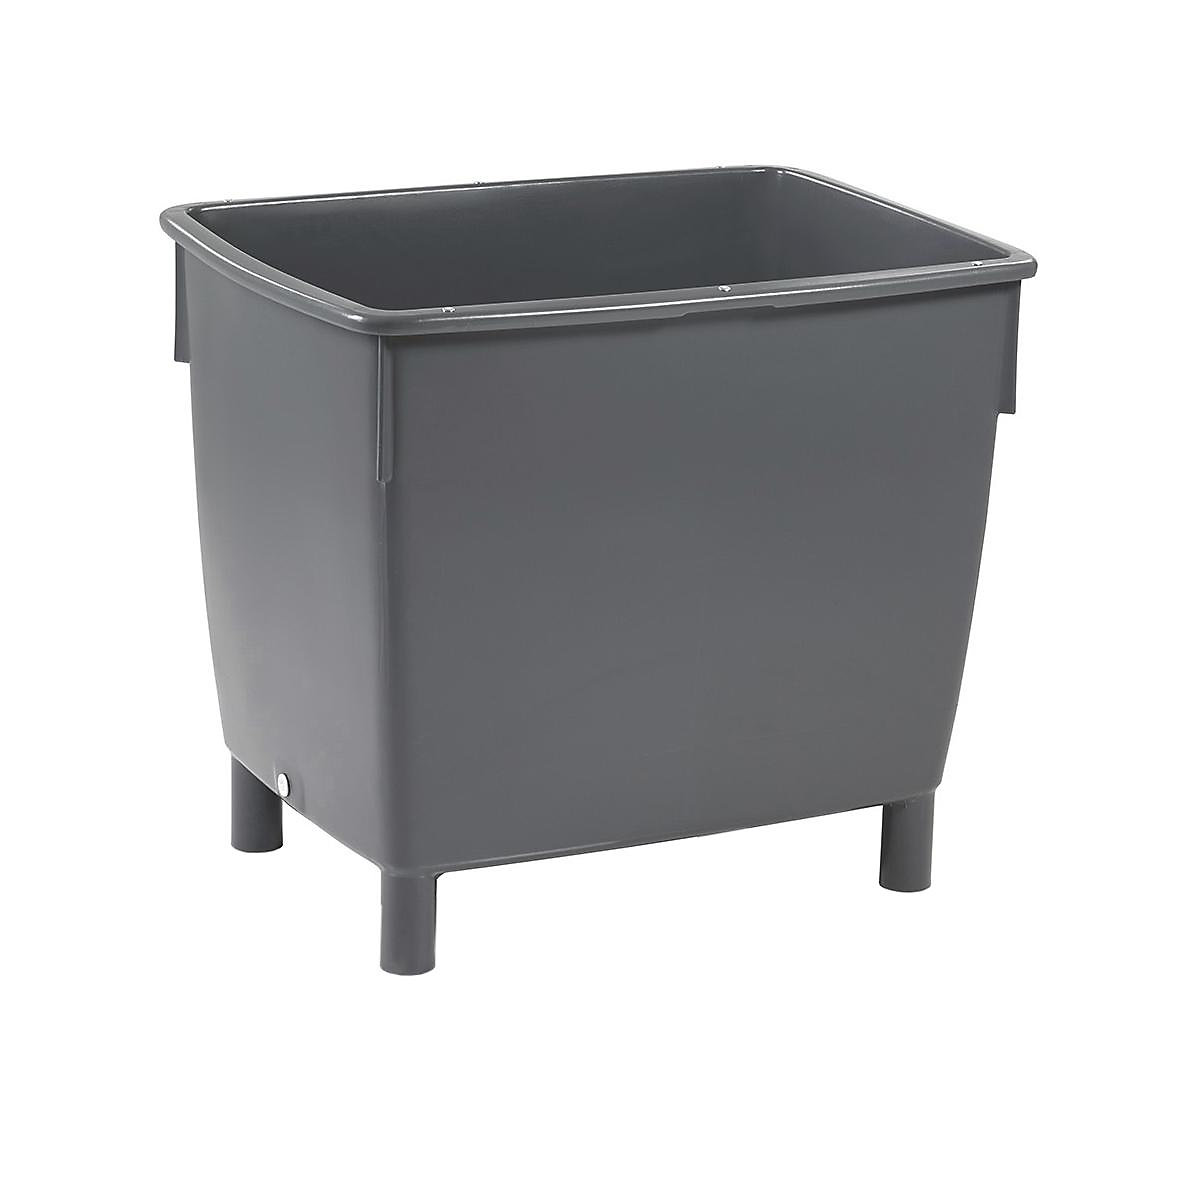 Rectangular container, water container, capacity 400 l, basalt grey-5